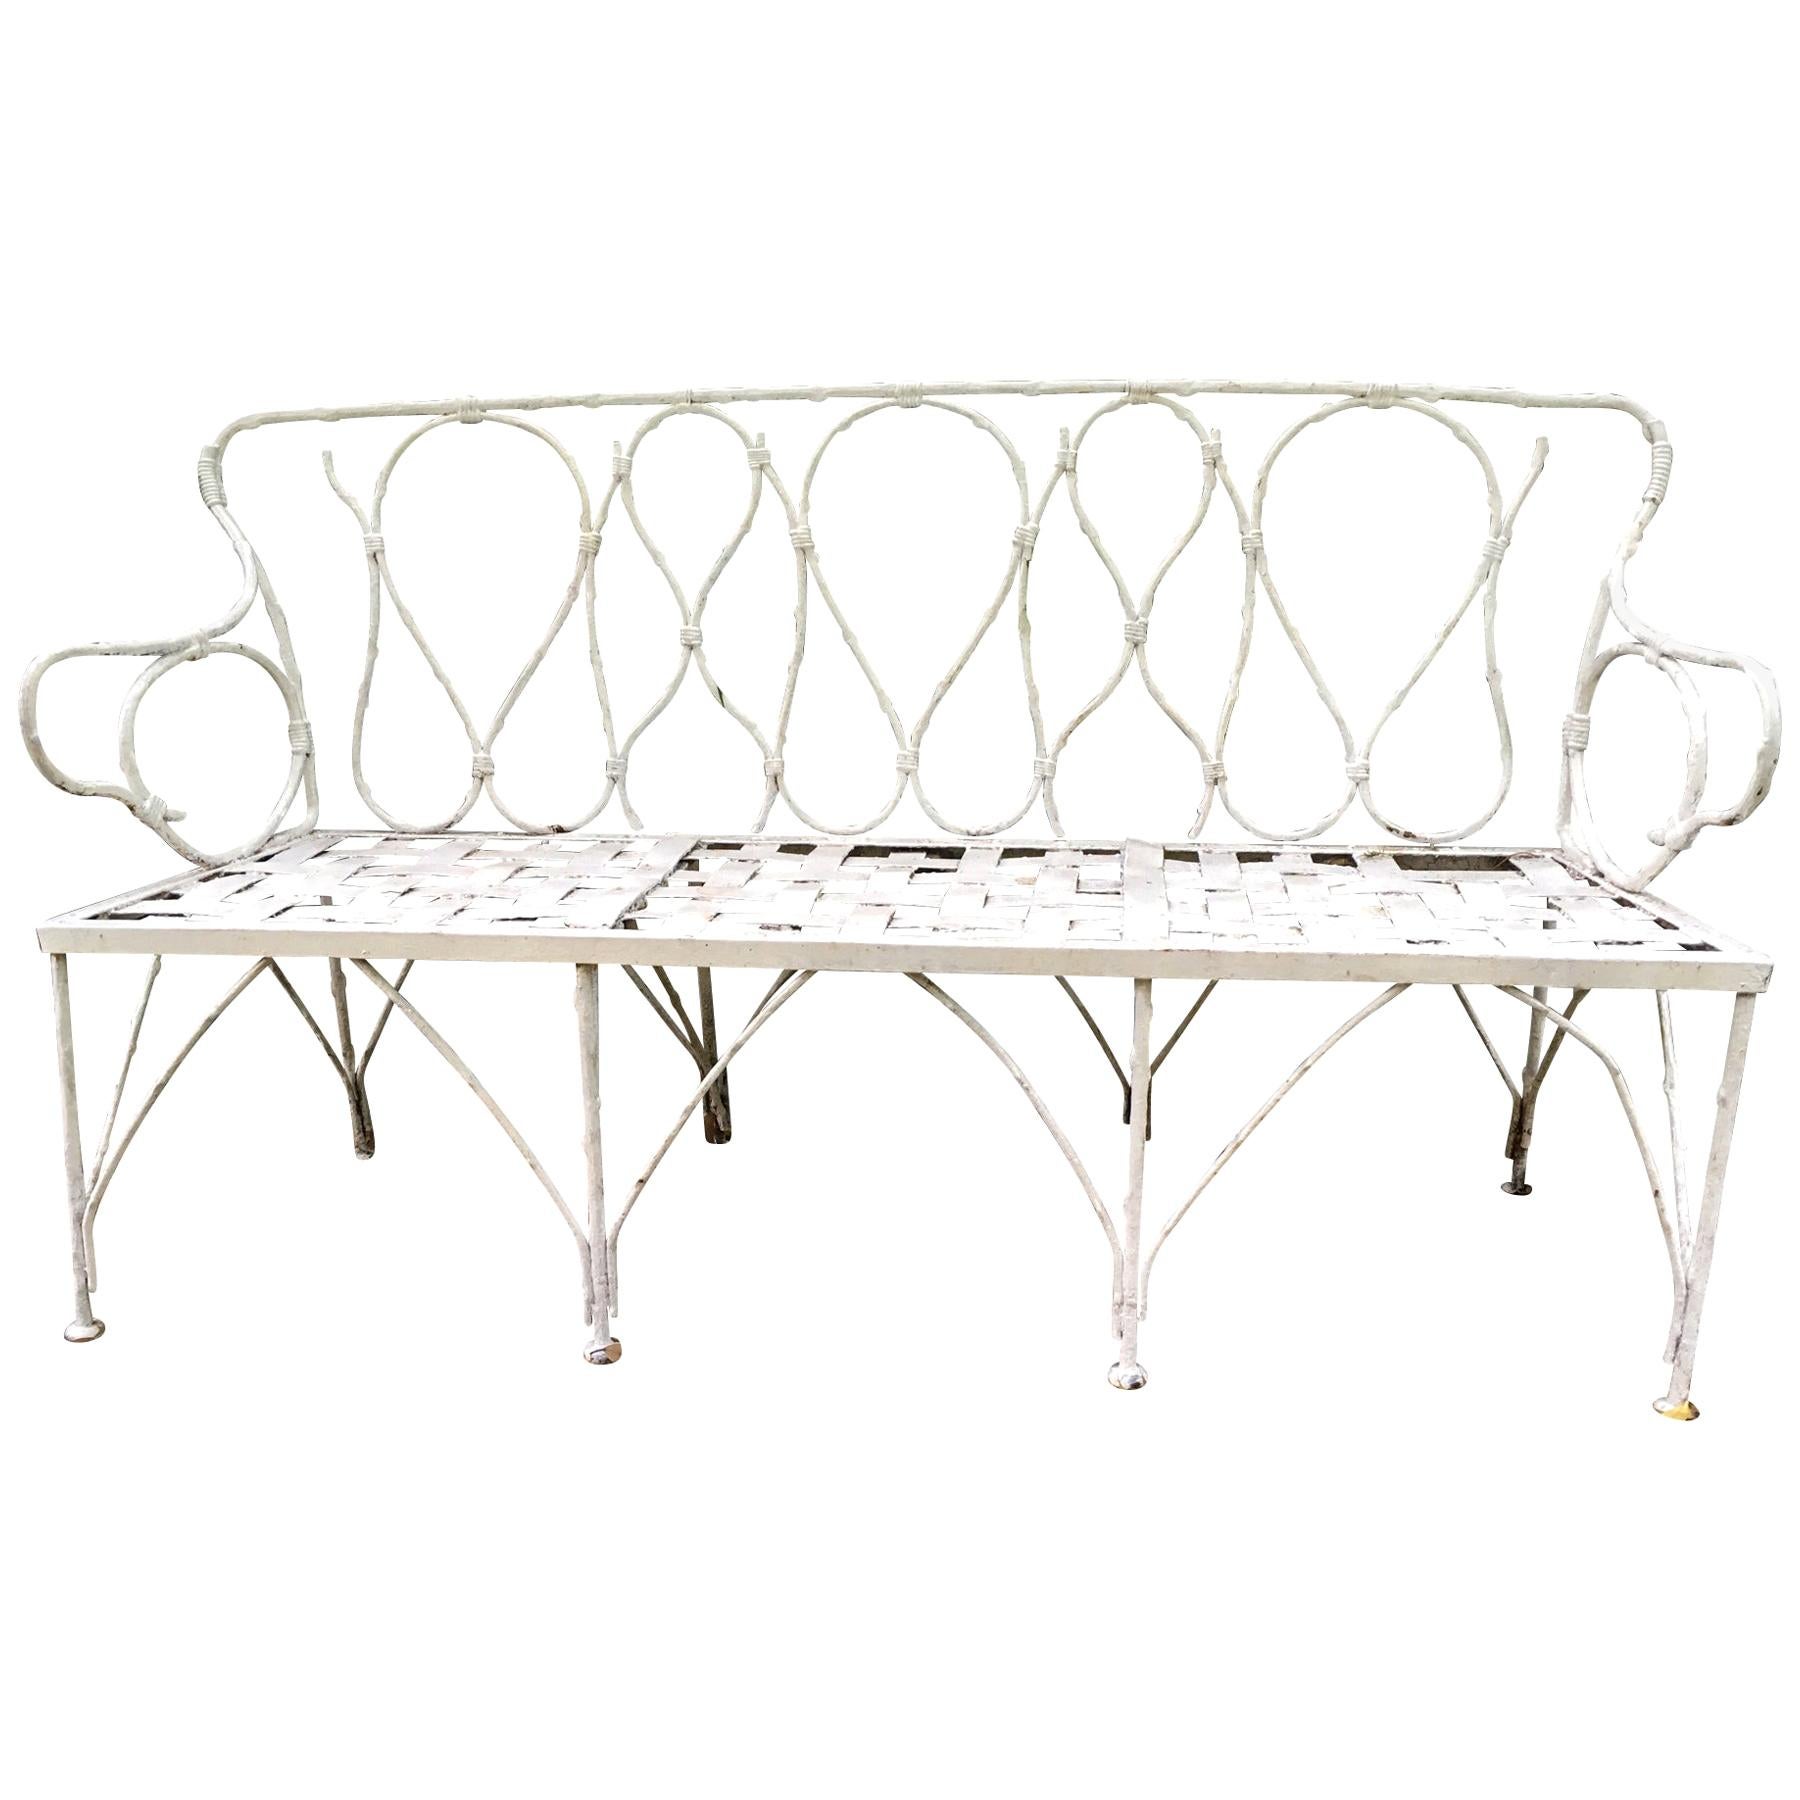 Early 1920s French Faux Bamboo Wrought Iron Garden Bench For Sale